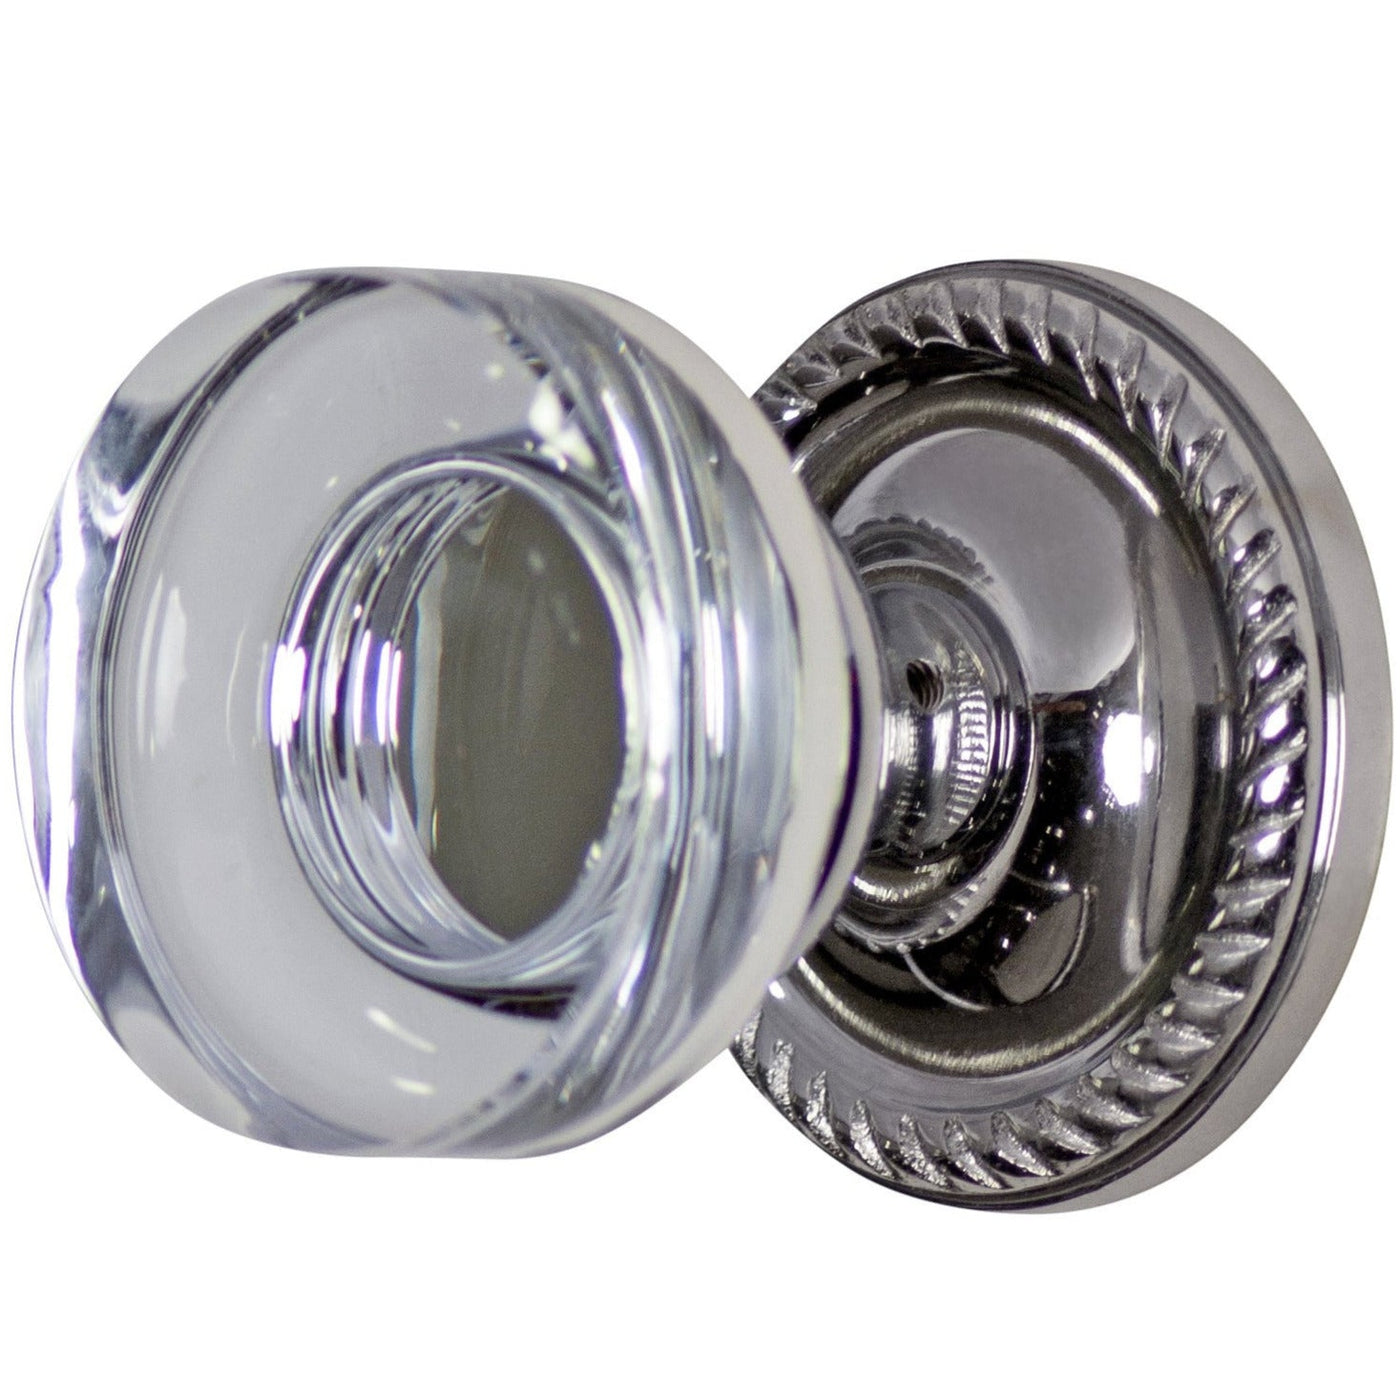 Crystal Clear Disc Door Knob Set with Georgian Roped Rosette (Several Finishes Available)